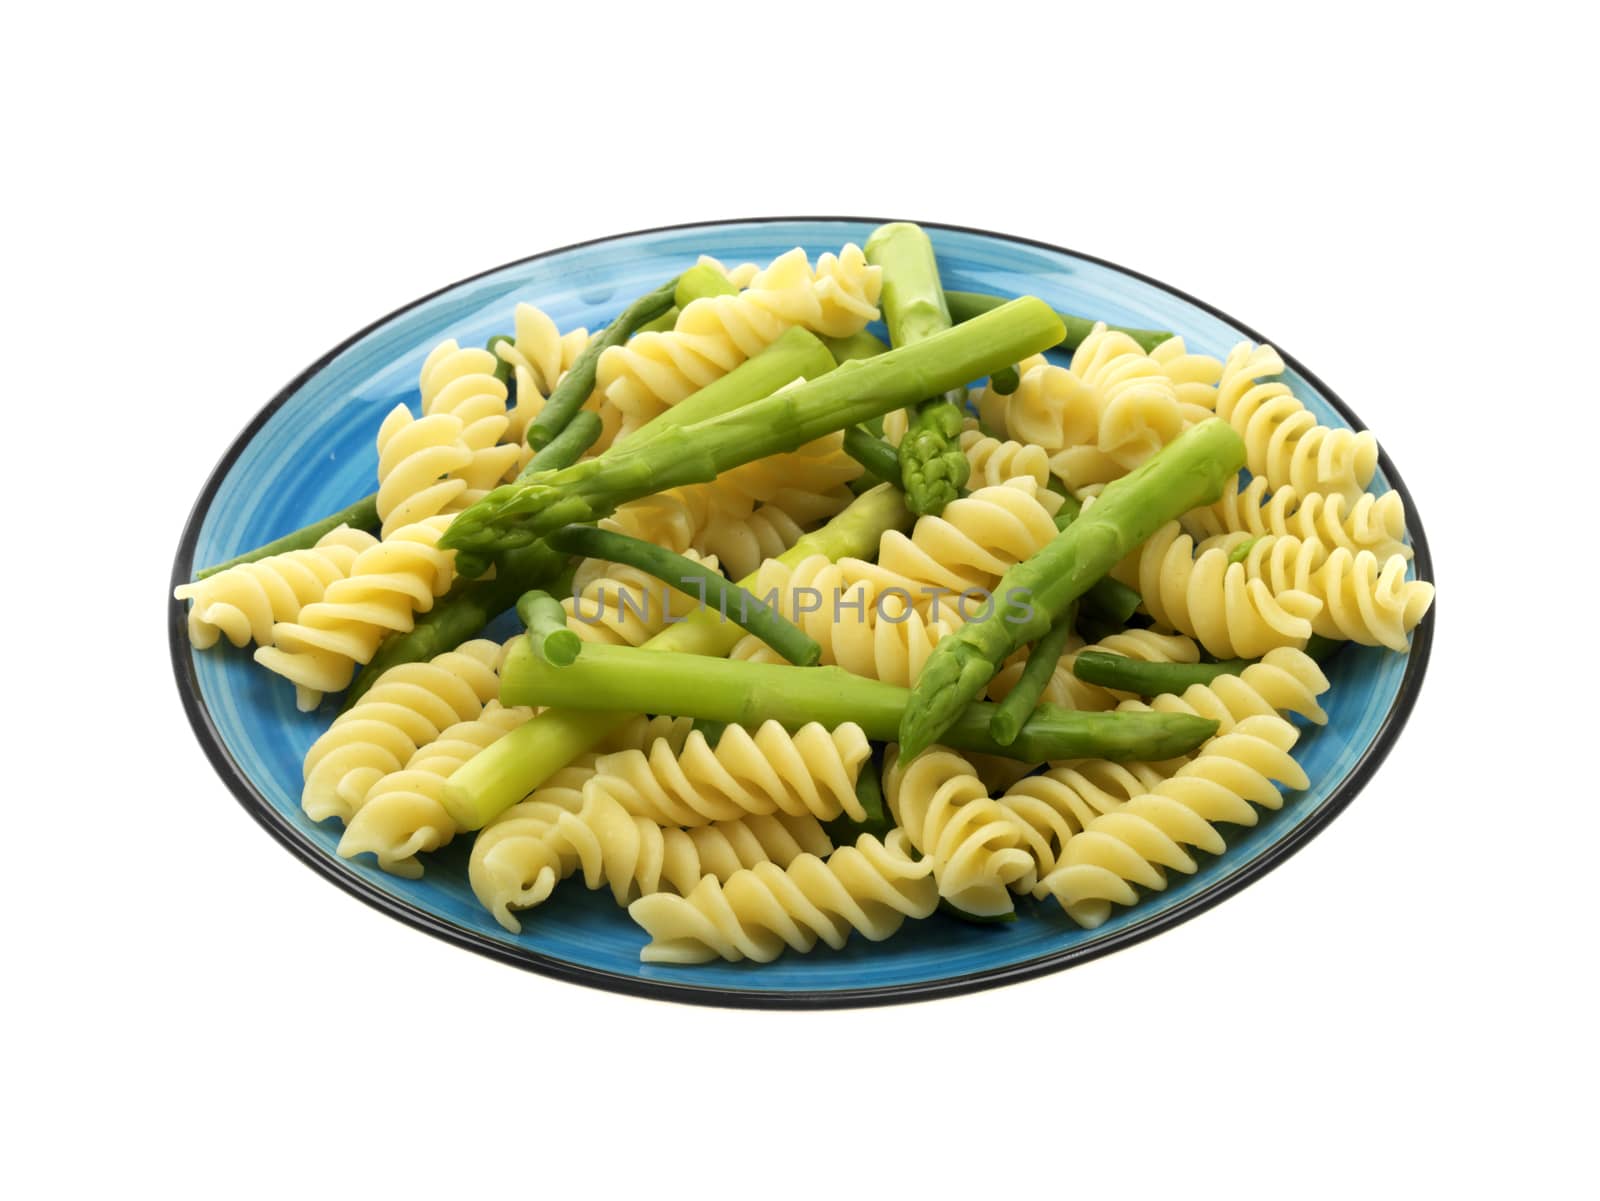 Pasta with Green Beans And Asparagus by Whiteboxmedia